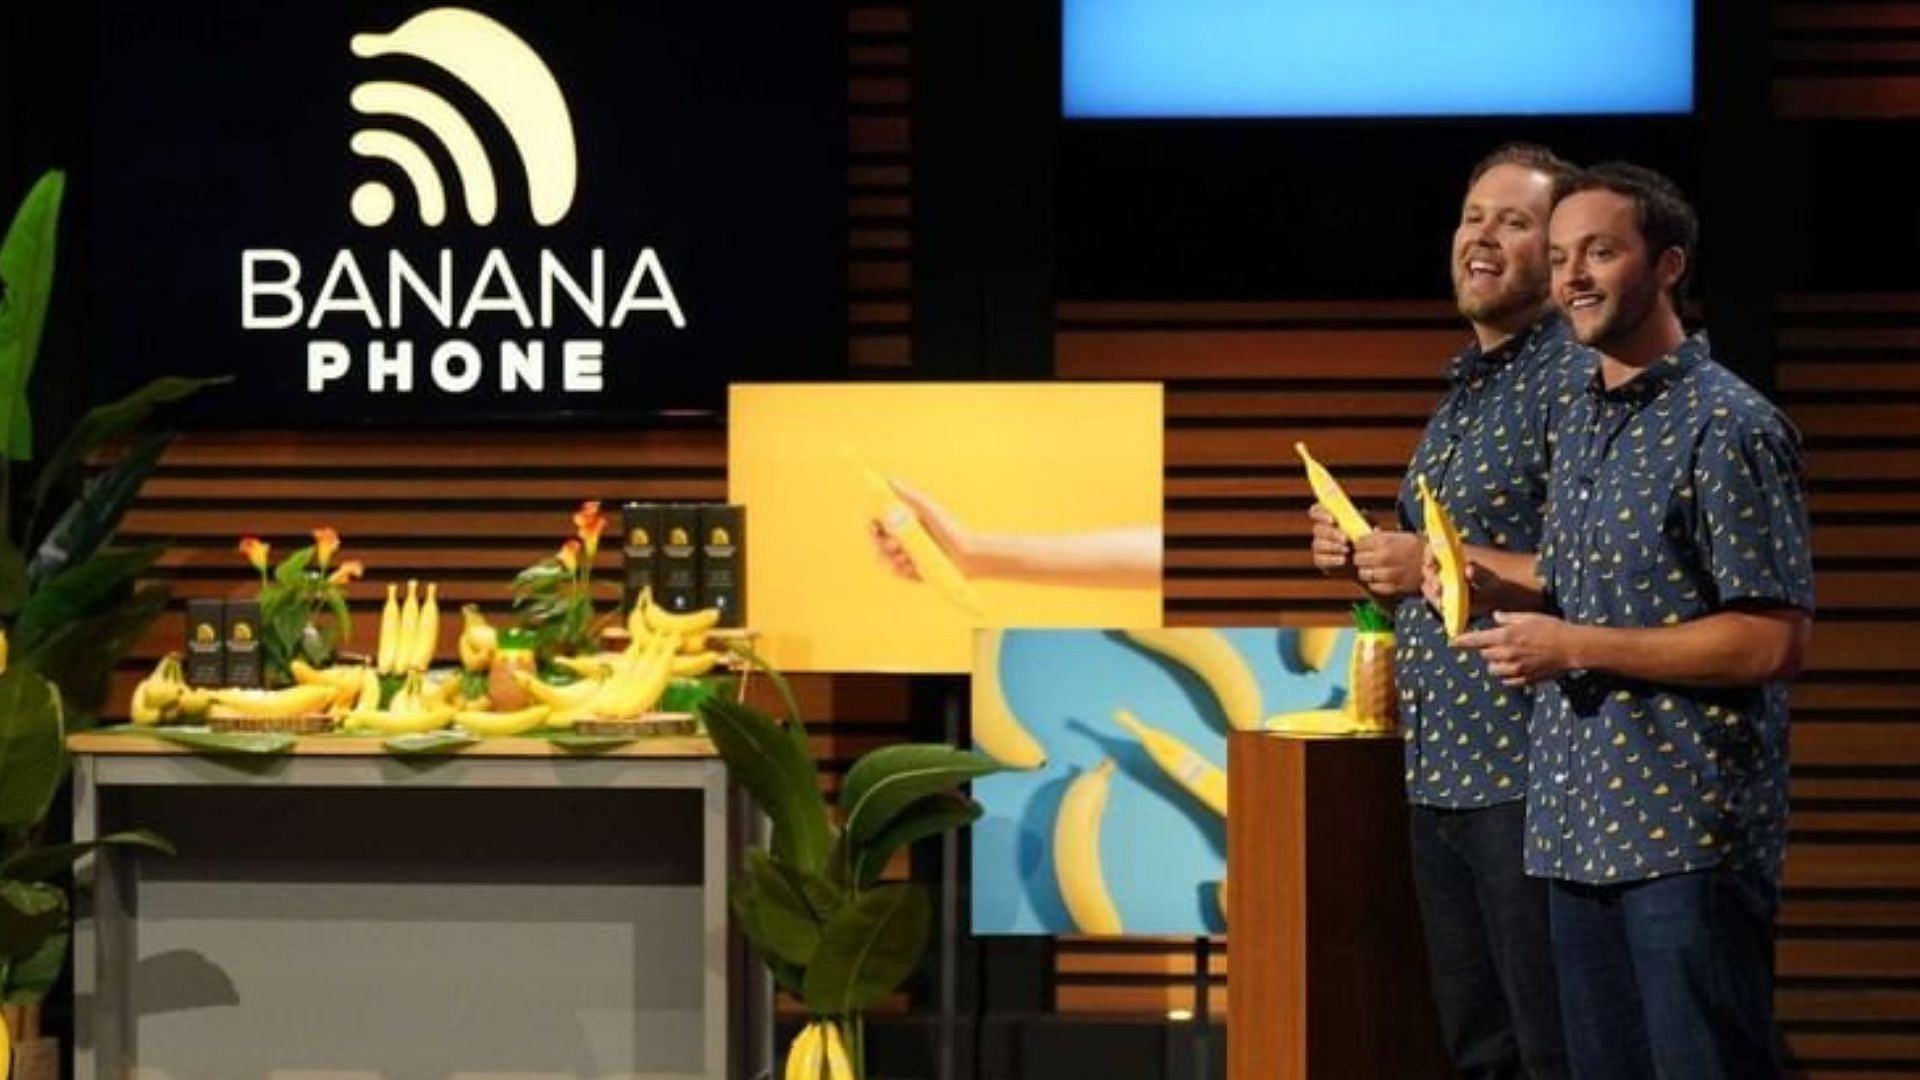 Max Brown and Brian Brunsing to pitch for Banana Phone product on Shark Tank on Friday (Image via bananaphone.io/Instagram)